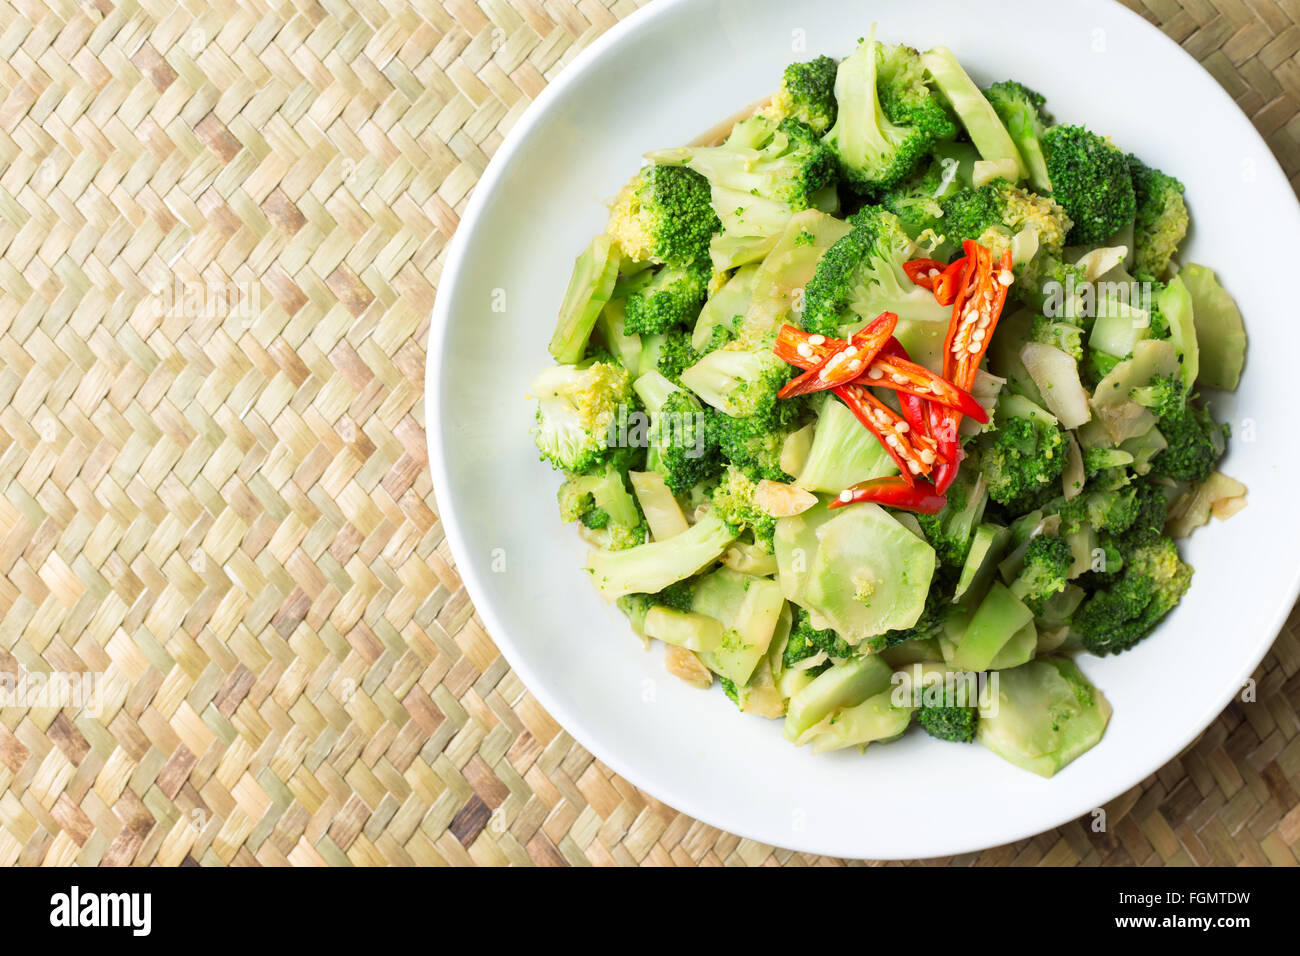 Stir Fried Broccoli (Pad Pak) Thai Traditional Food Hot And Spicy In White Plate On wicker Background Stock Photo